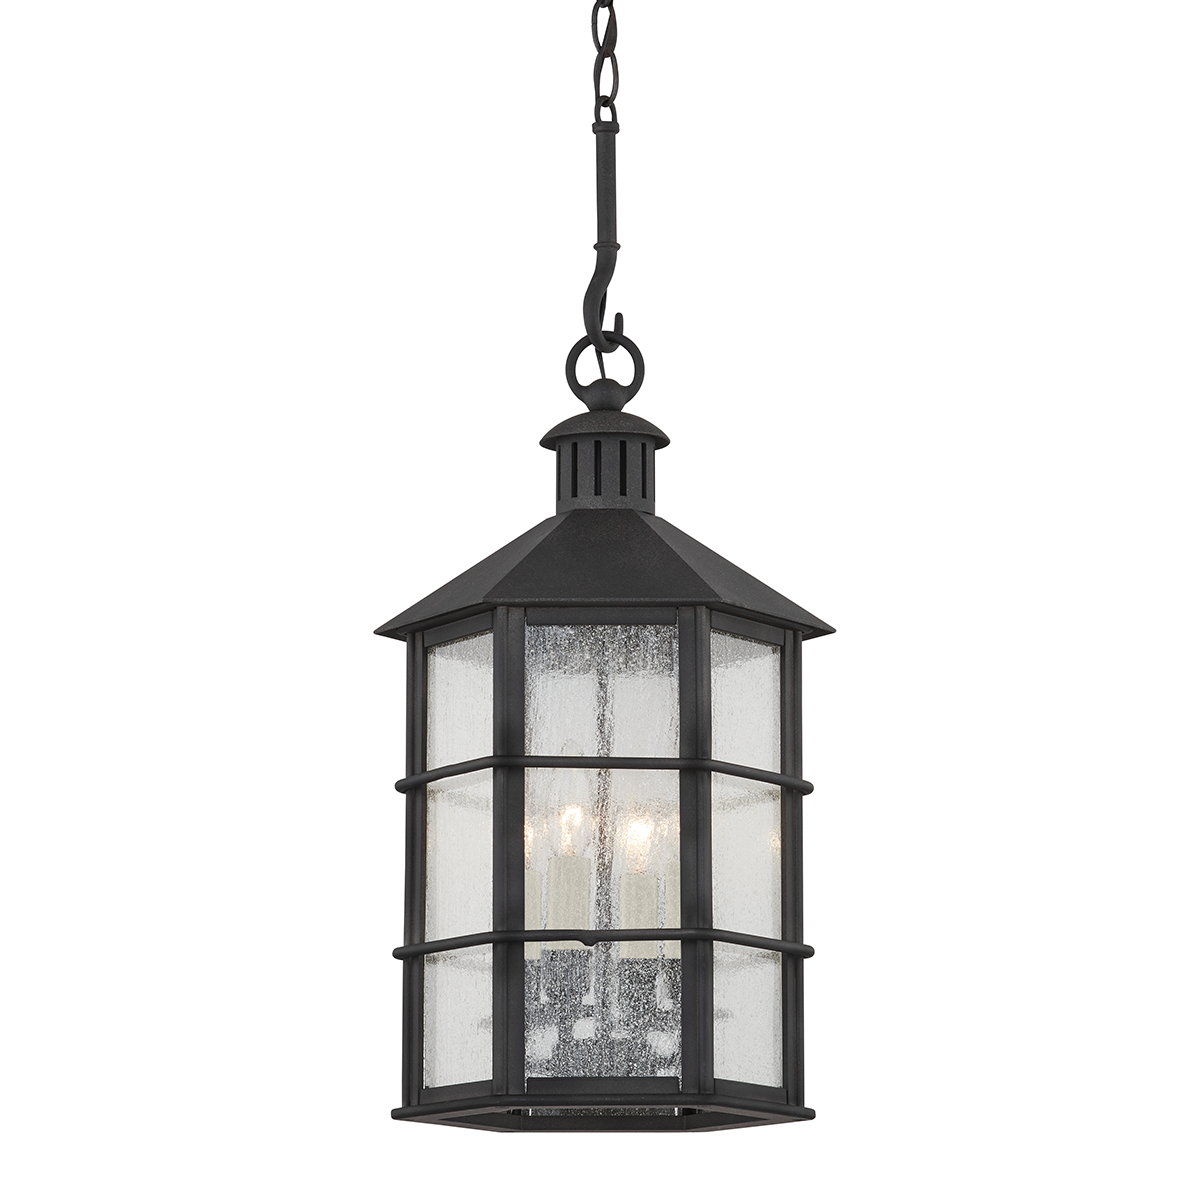 Troy Lighting 4 LIGHT EXTERIOR LANTERN F2526 Outdoor l Wall Troy Lighting FRENCH IRON  